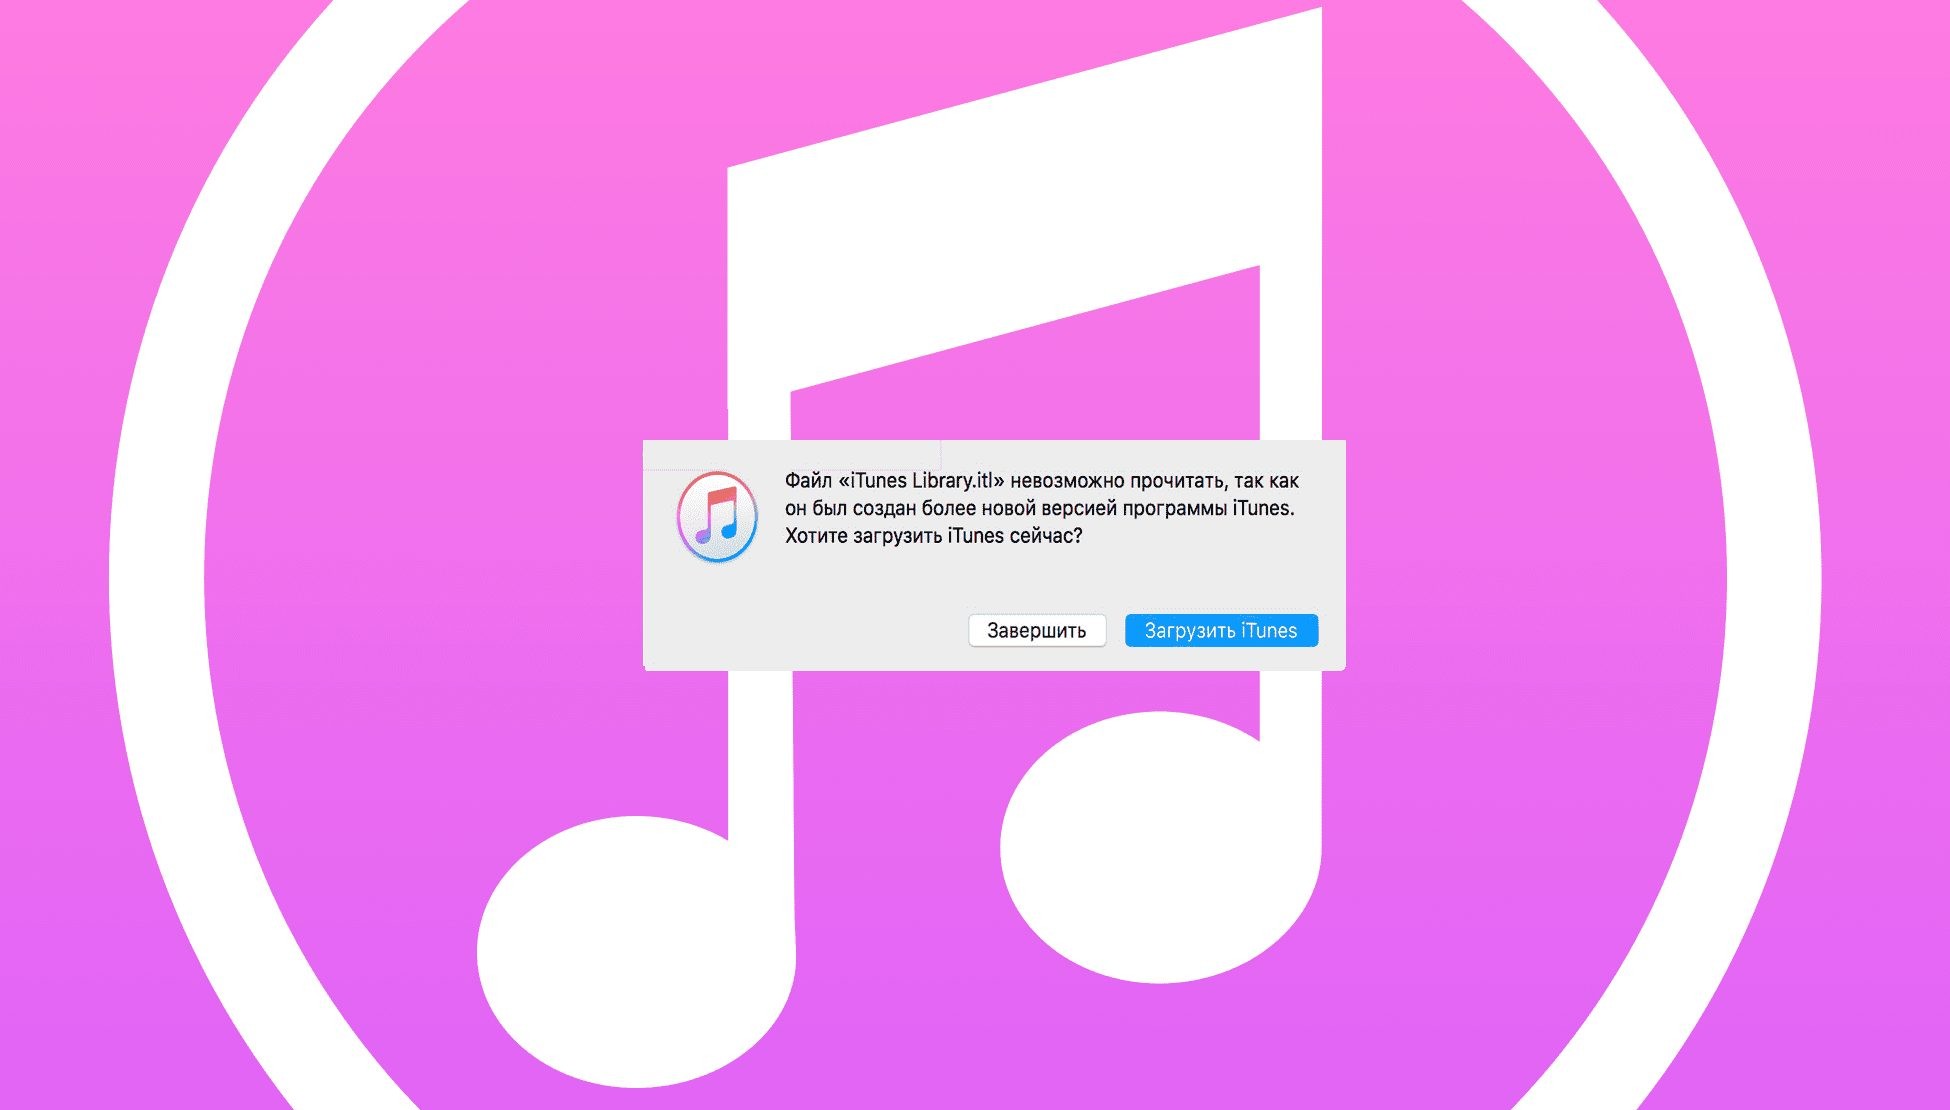 ITUNES Library ITL невозможно прочитать. File ITUNES Library ITL cannot be read. Файл itunes library itl